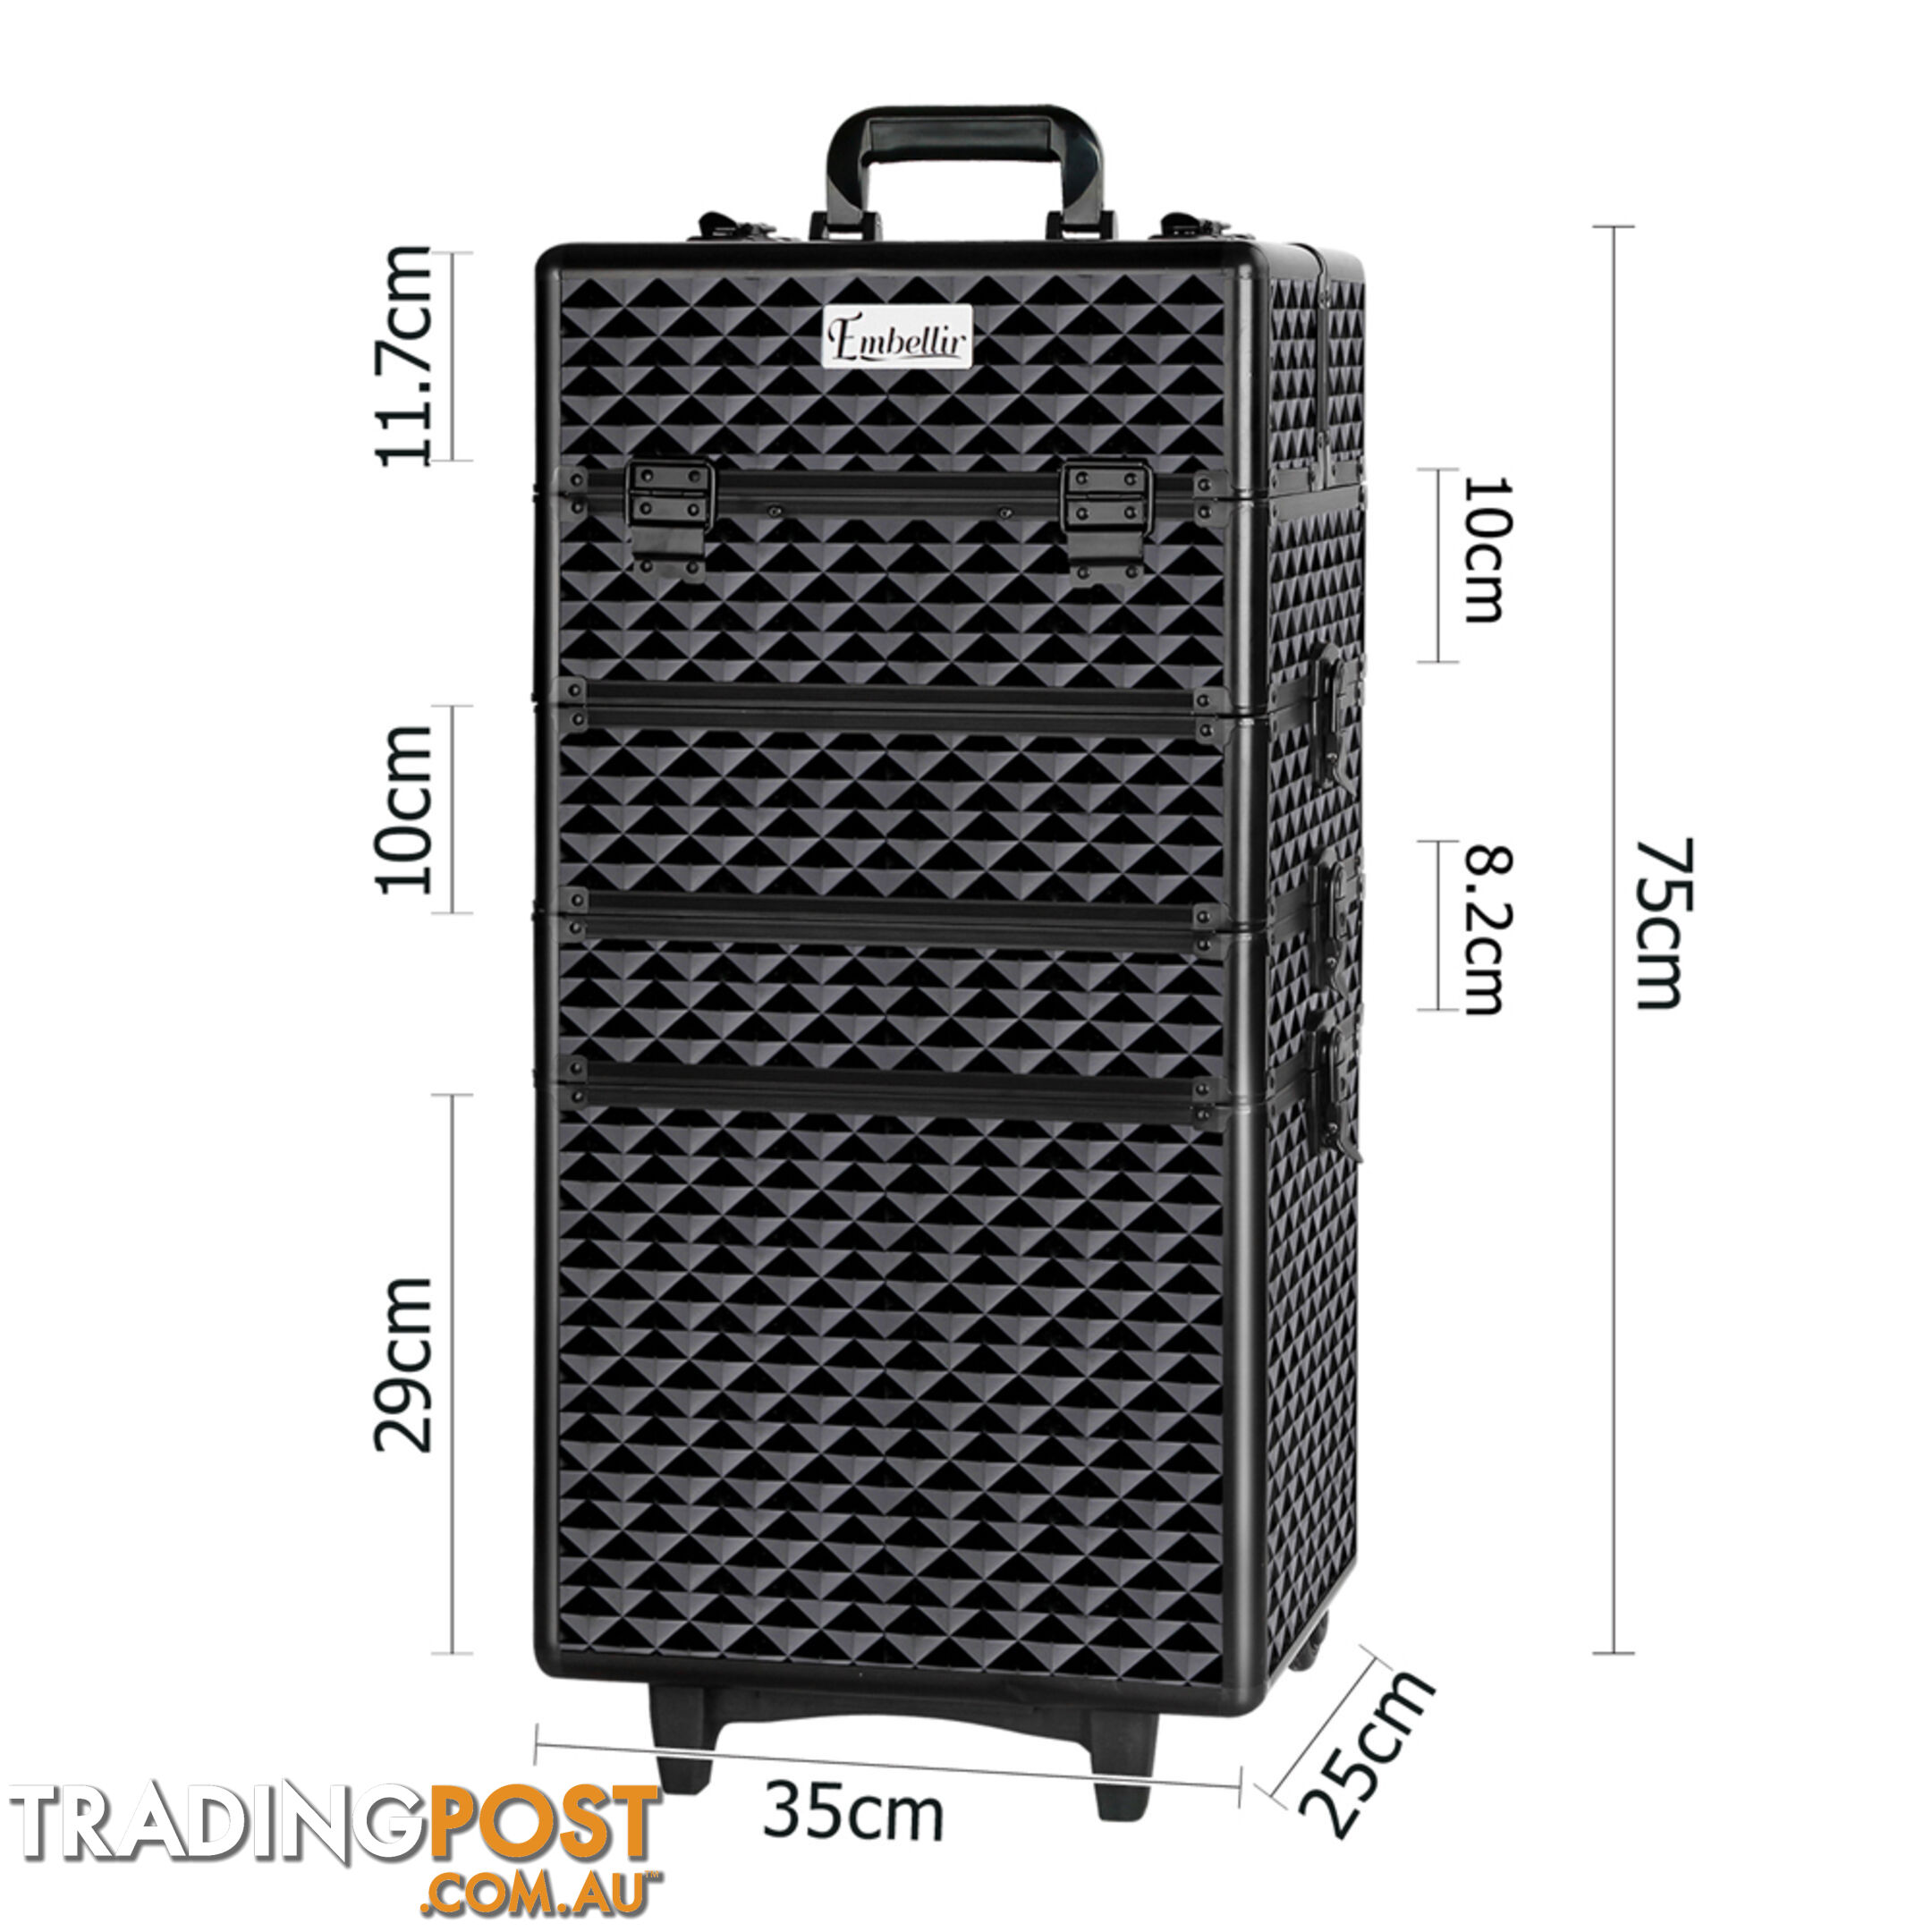 7 in 1 Portable Beauty Make up Cosmetic Trolley Case Diamond Black